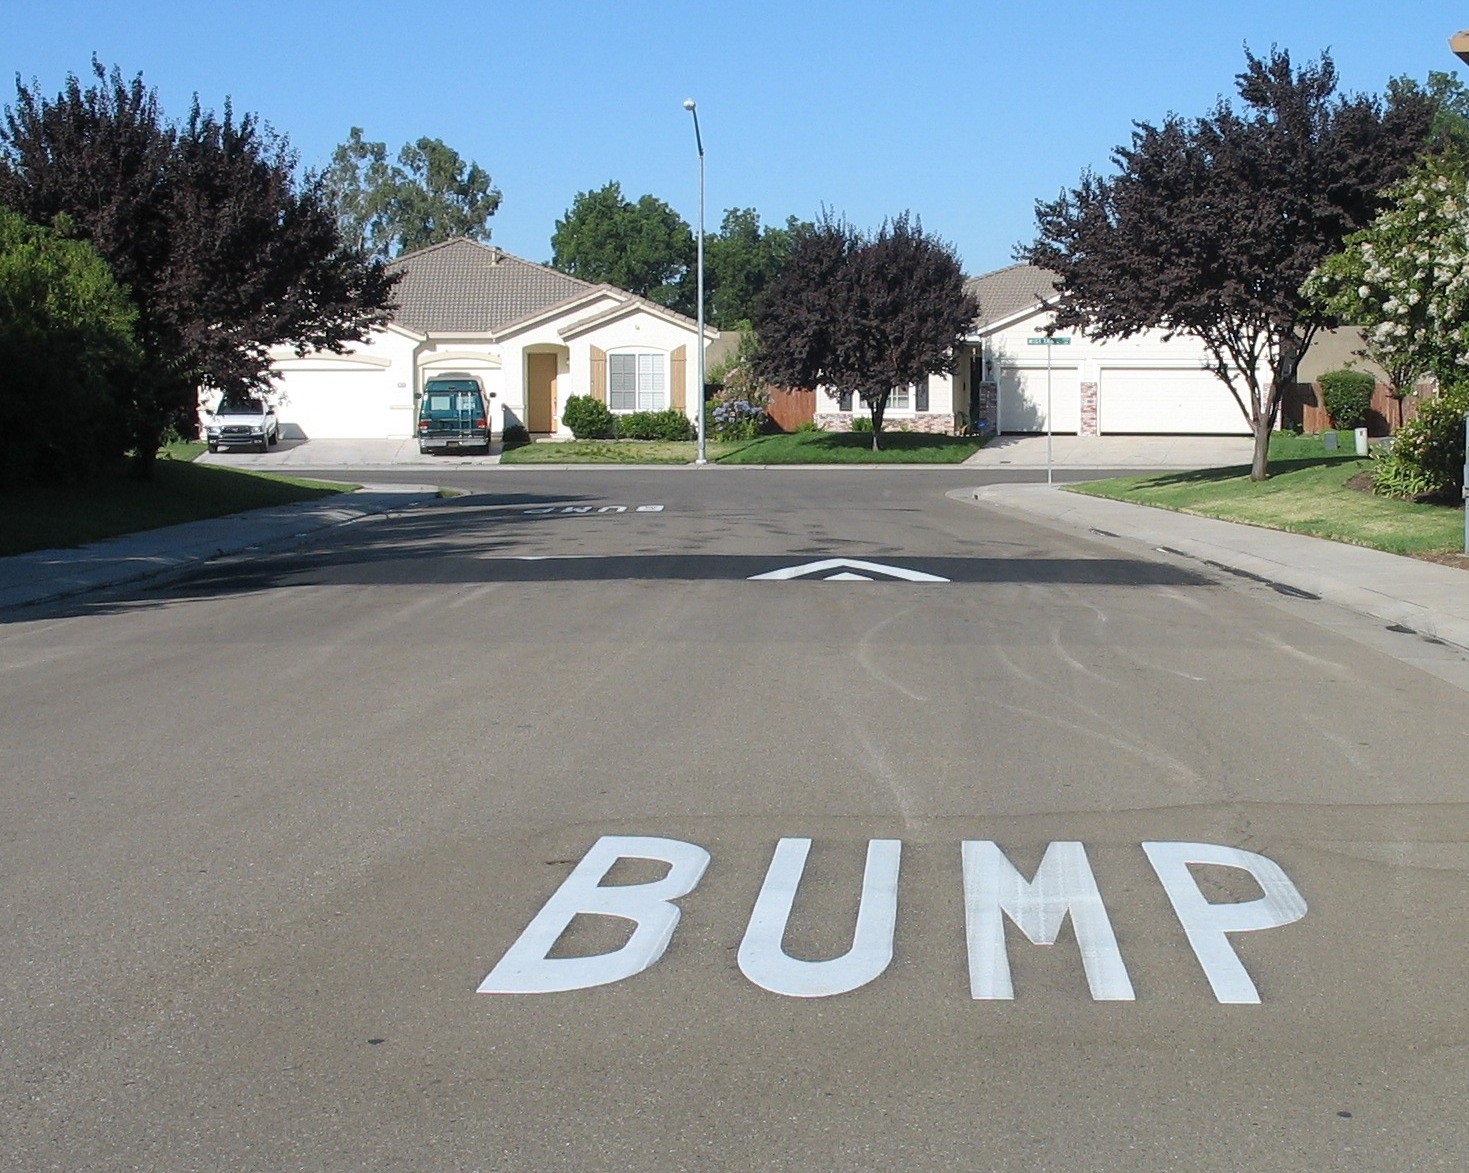 Speed Hump with Bump Legend available through Expedited Program